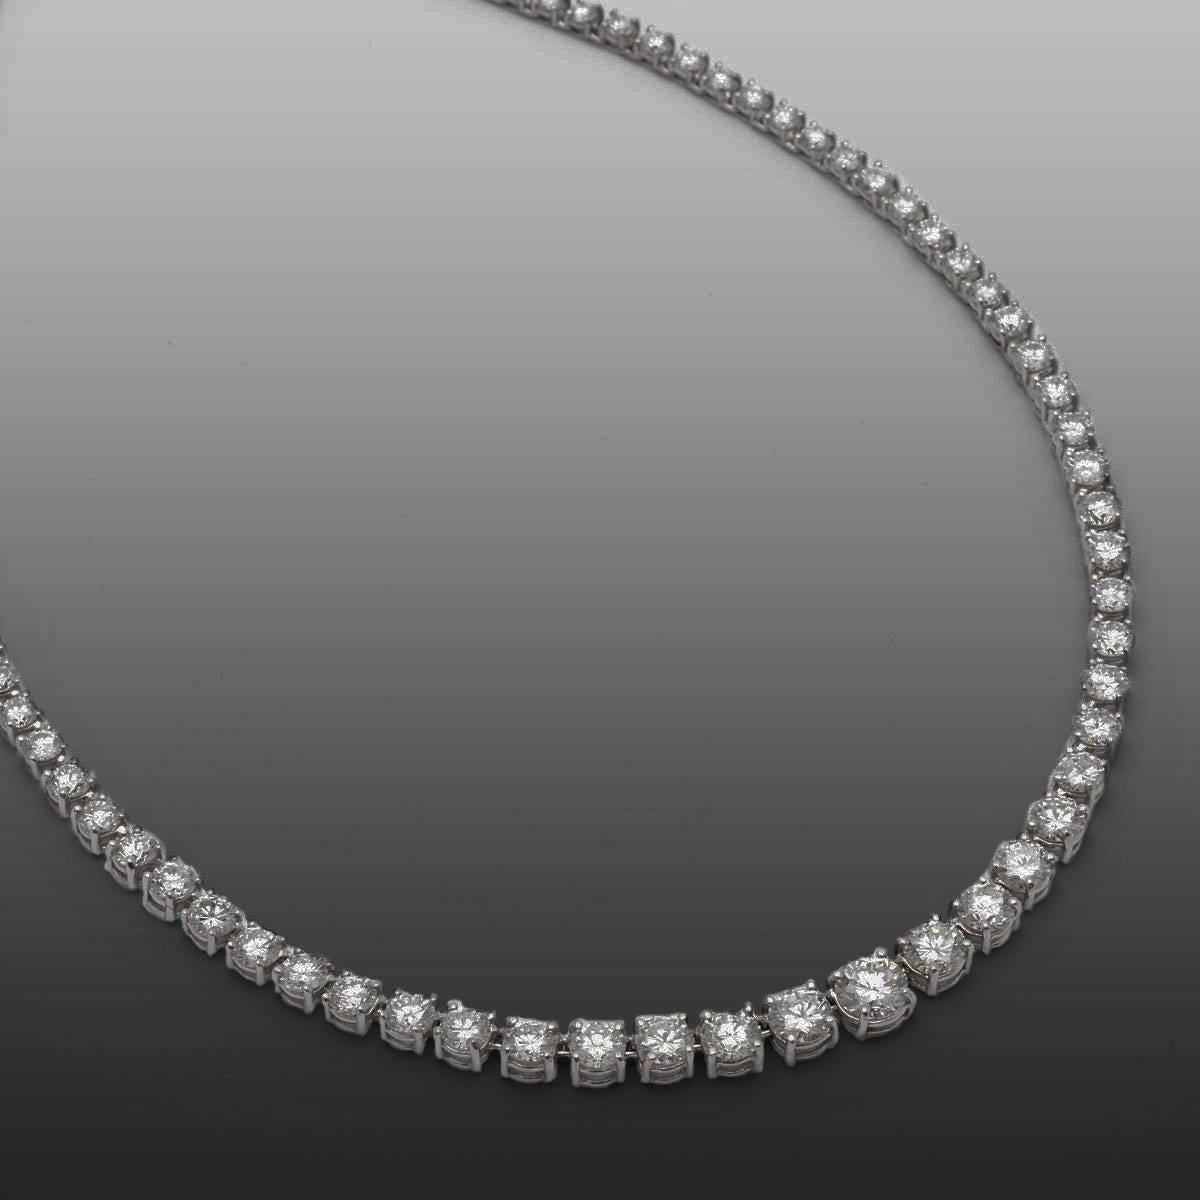 Platinum Graduated Diamond Necklace containing 127 F-G color VS+ clarity modern round brilliant diamonds weighing approximately 17.00 plus carats. 18"